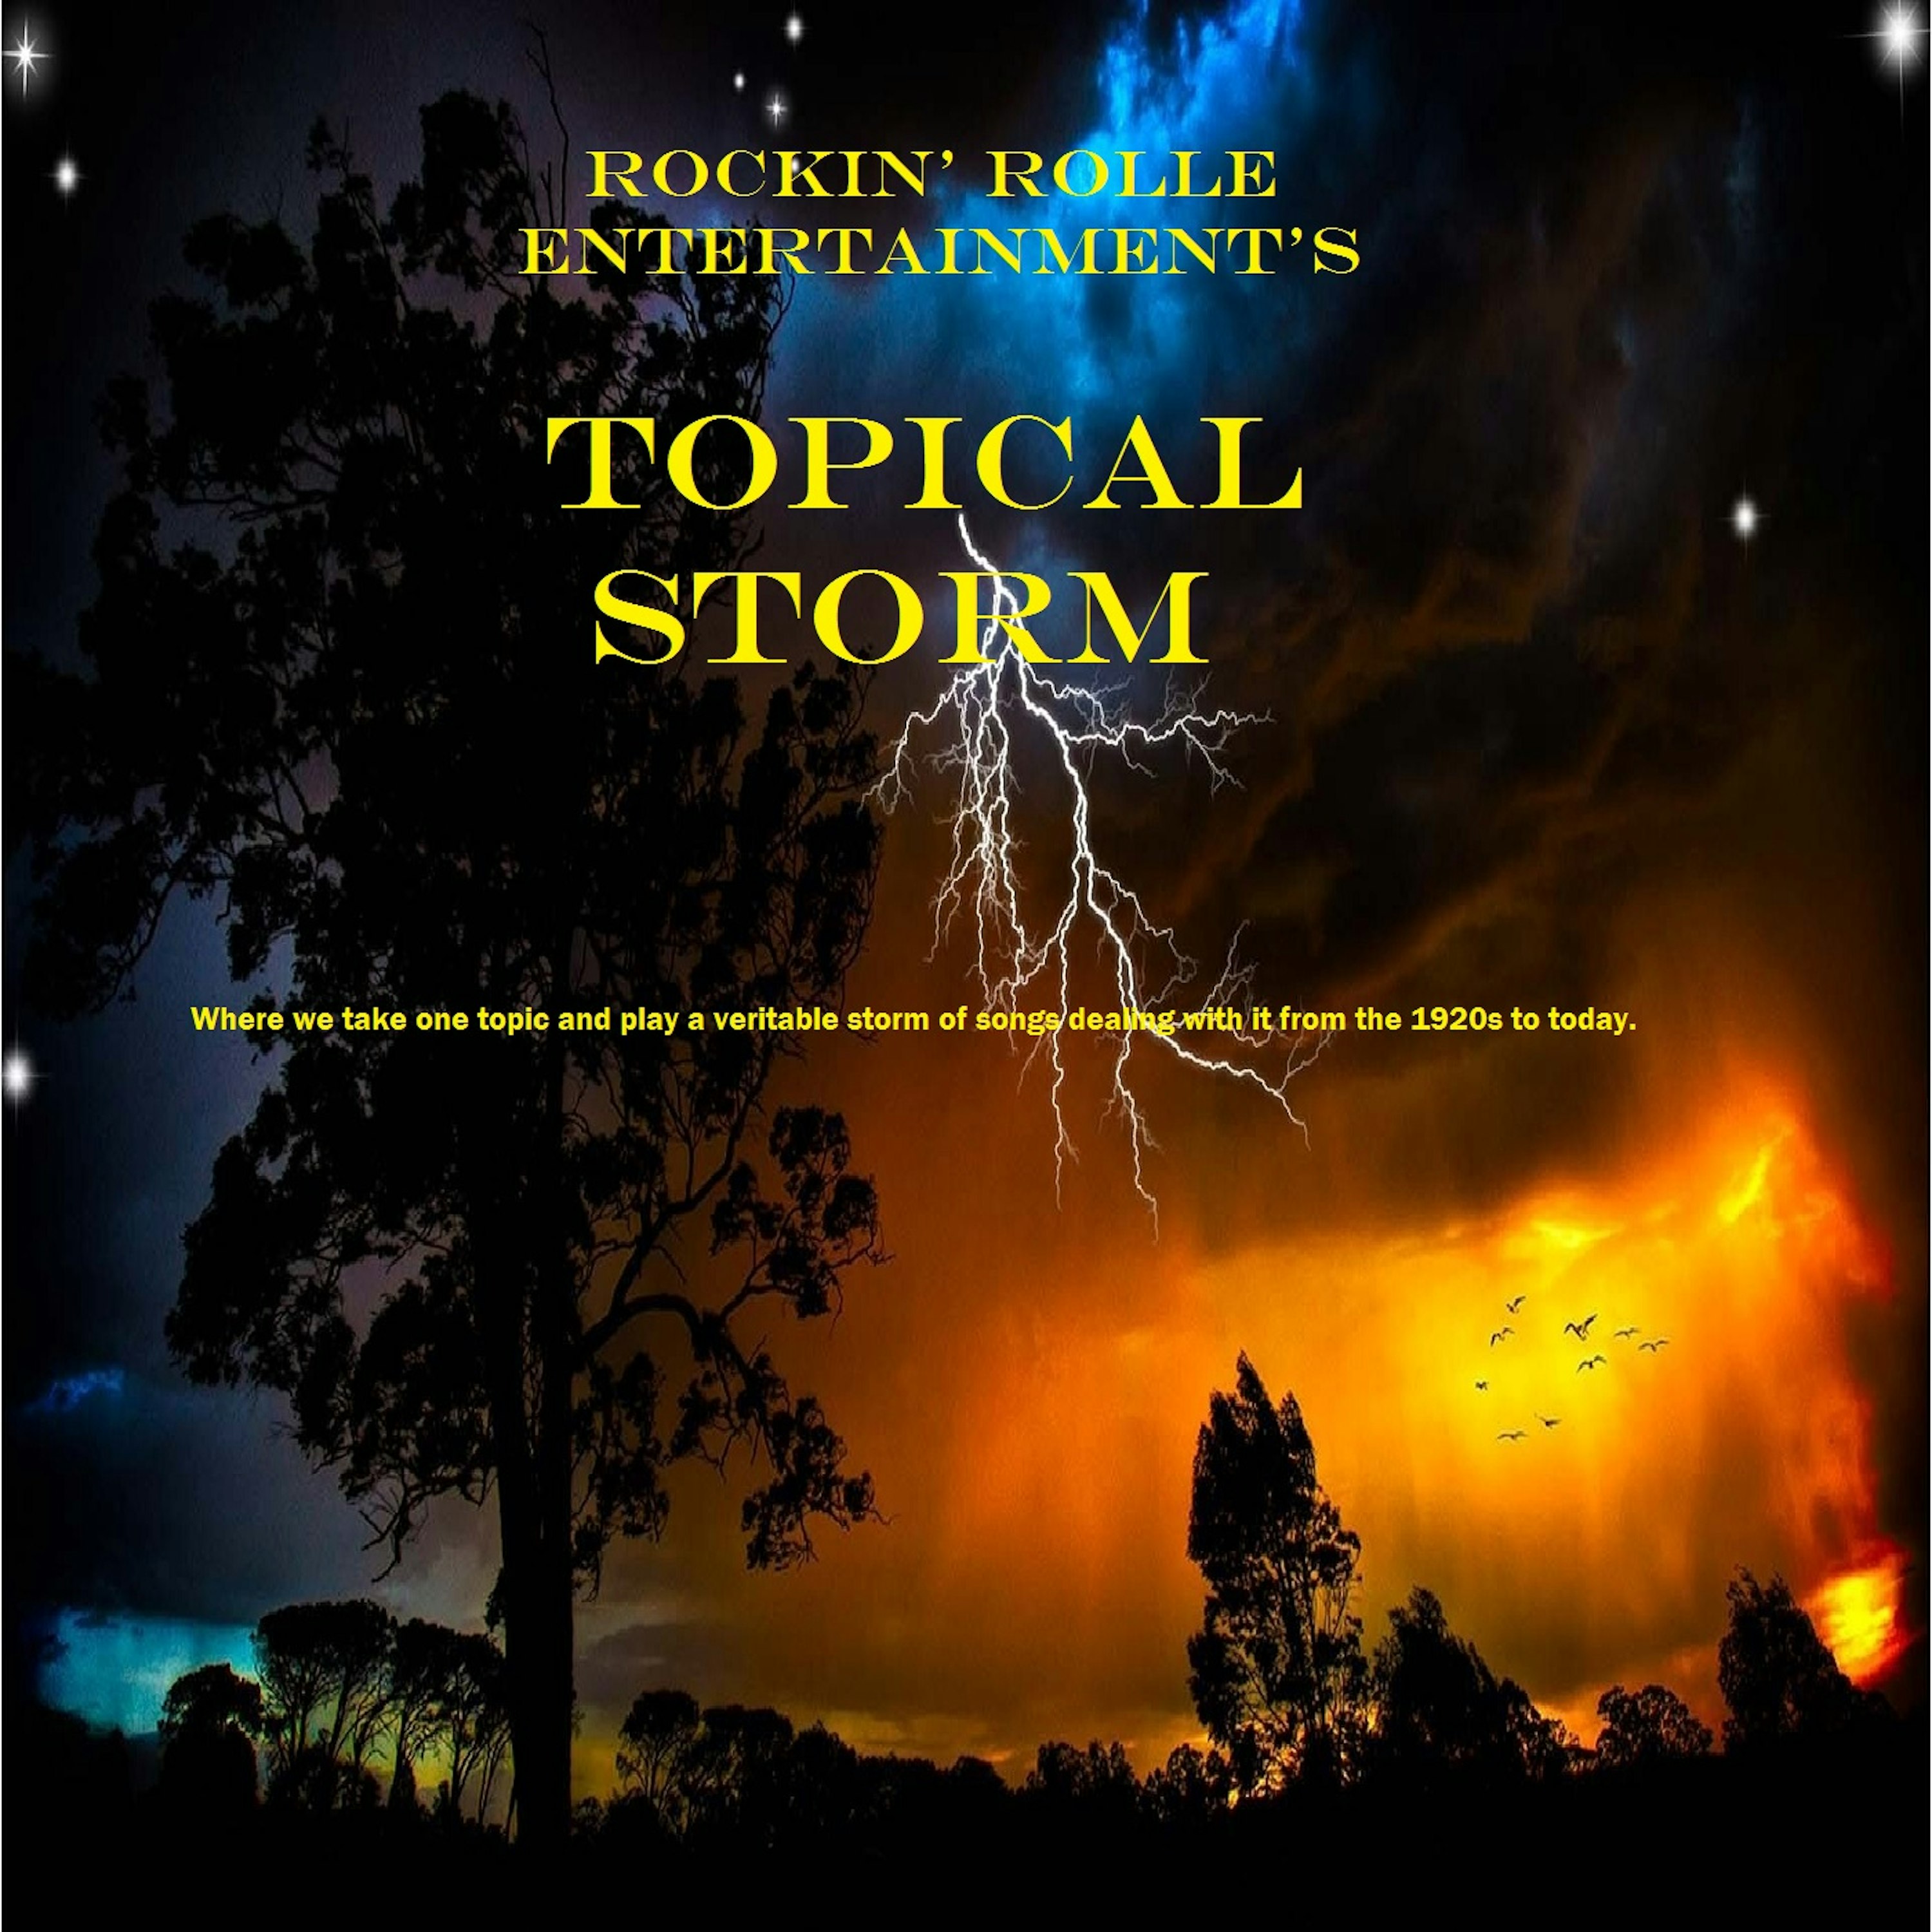 Rockin' Rolle Entertainment's TOPICAL STORM #1